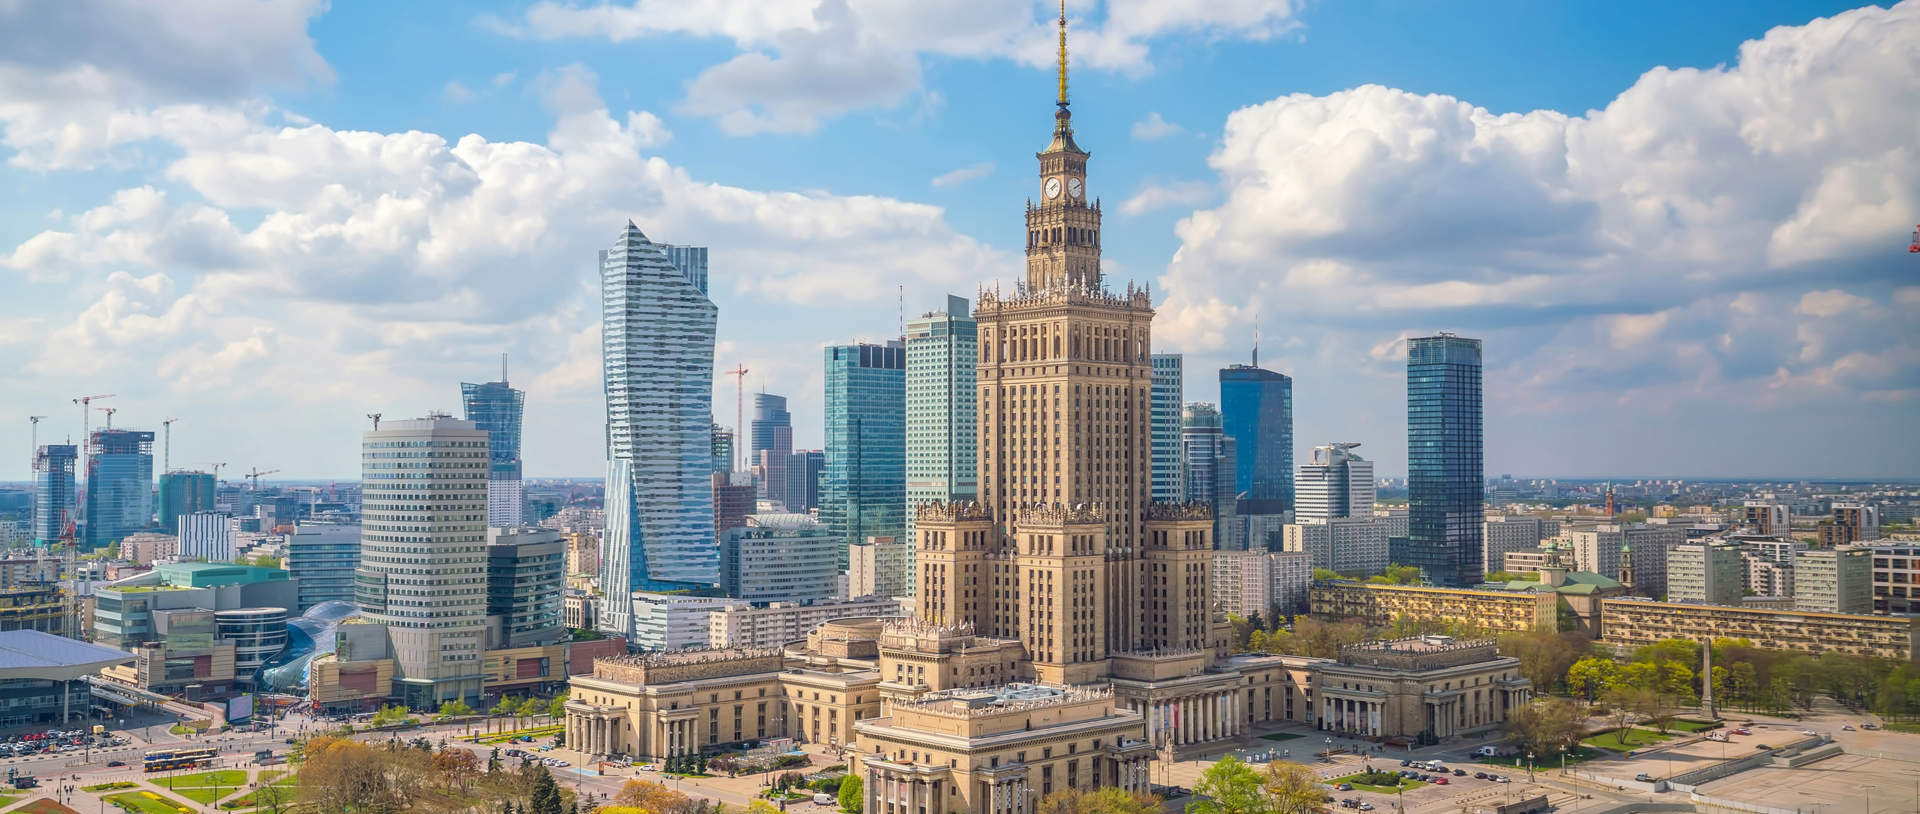 Aerial Photo Of Warsaw City Skyline In Poland